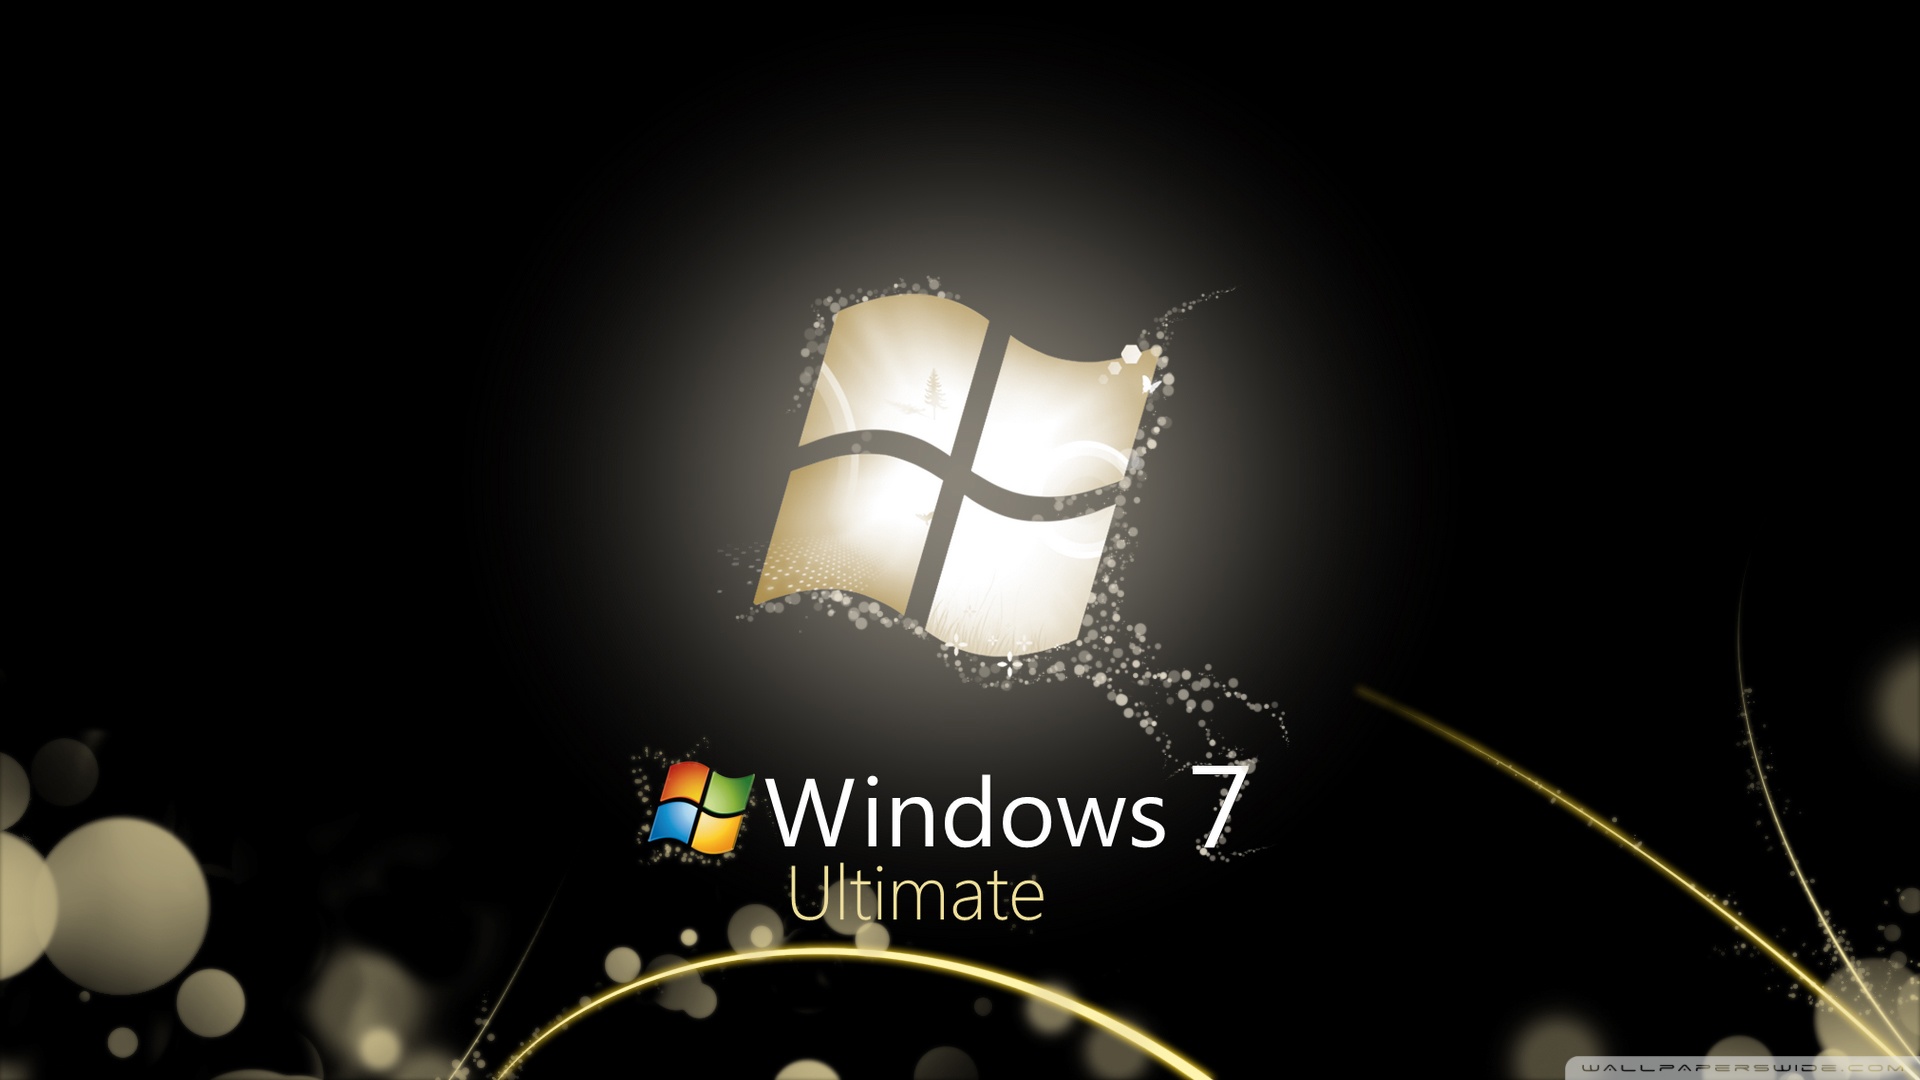 Windows 7 Ultimate Wallpapers Free Download Group 75